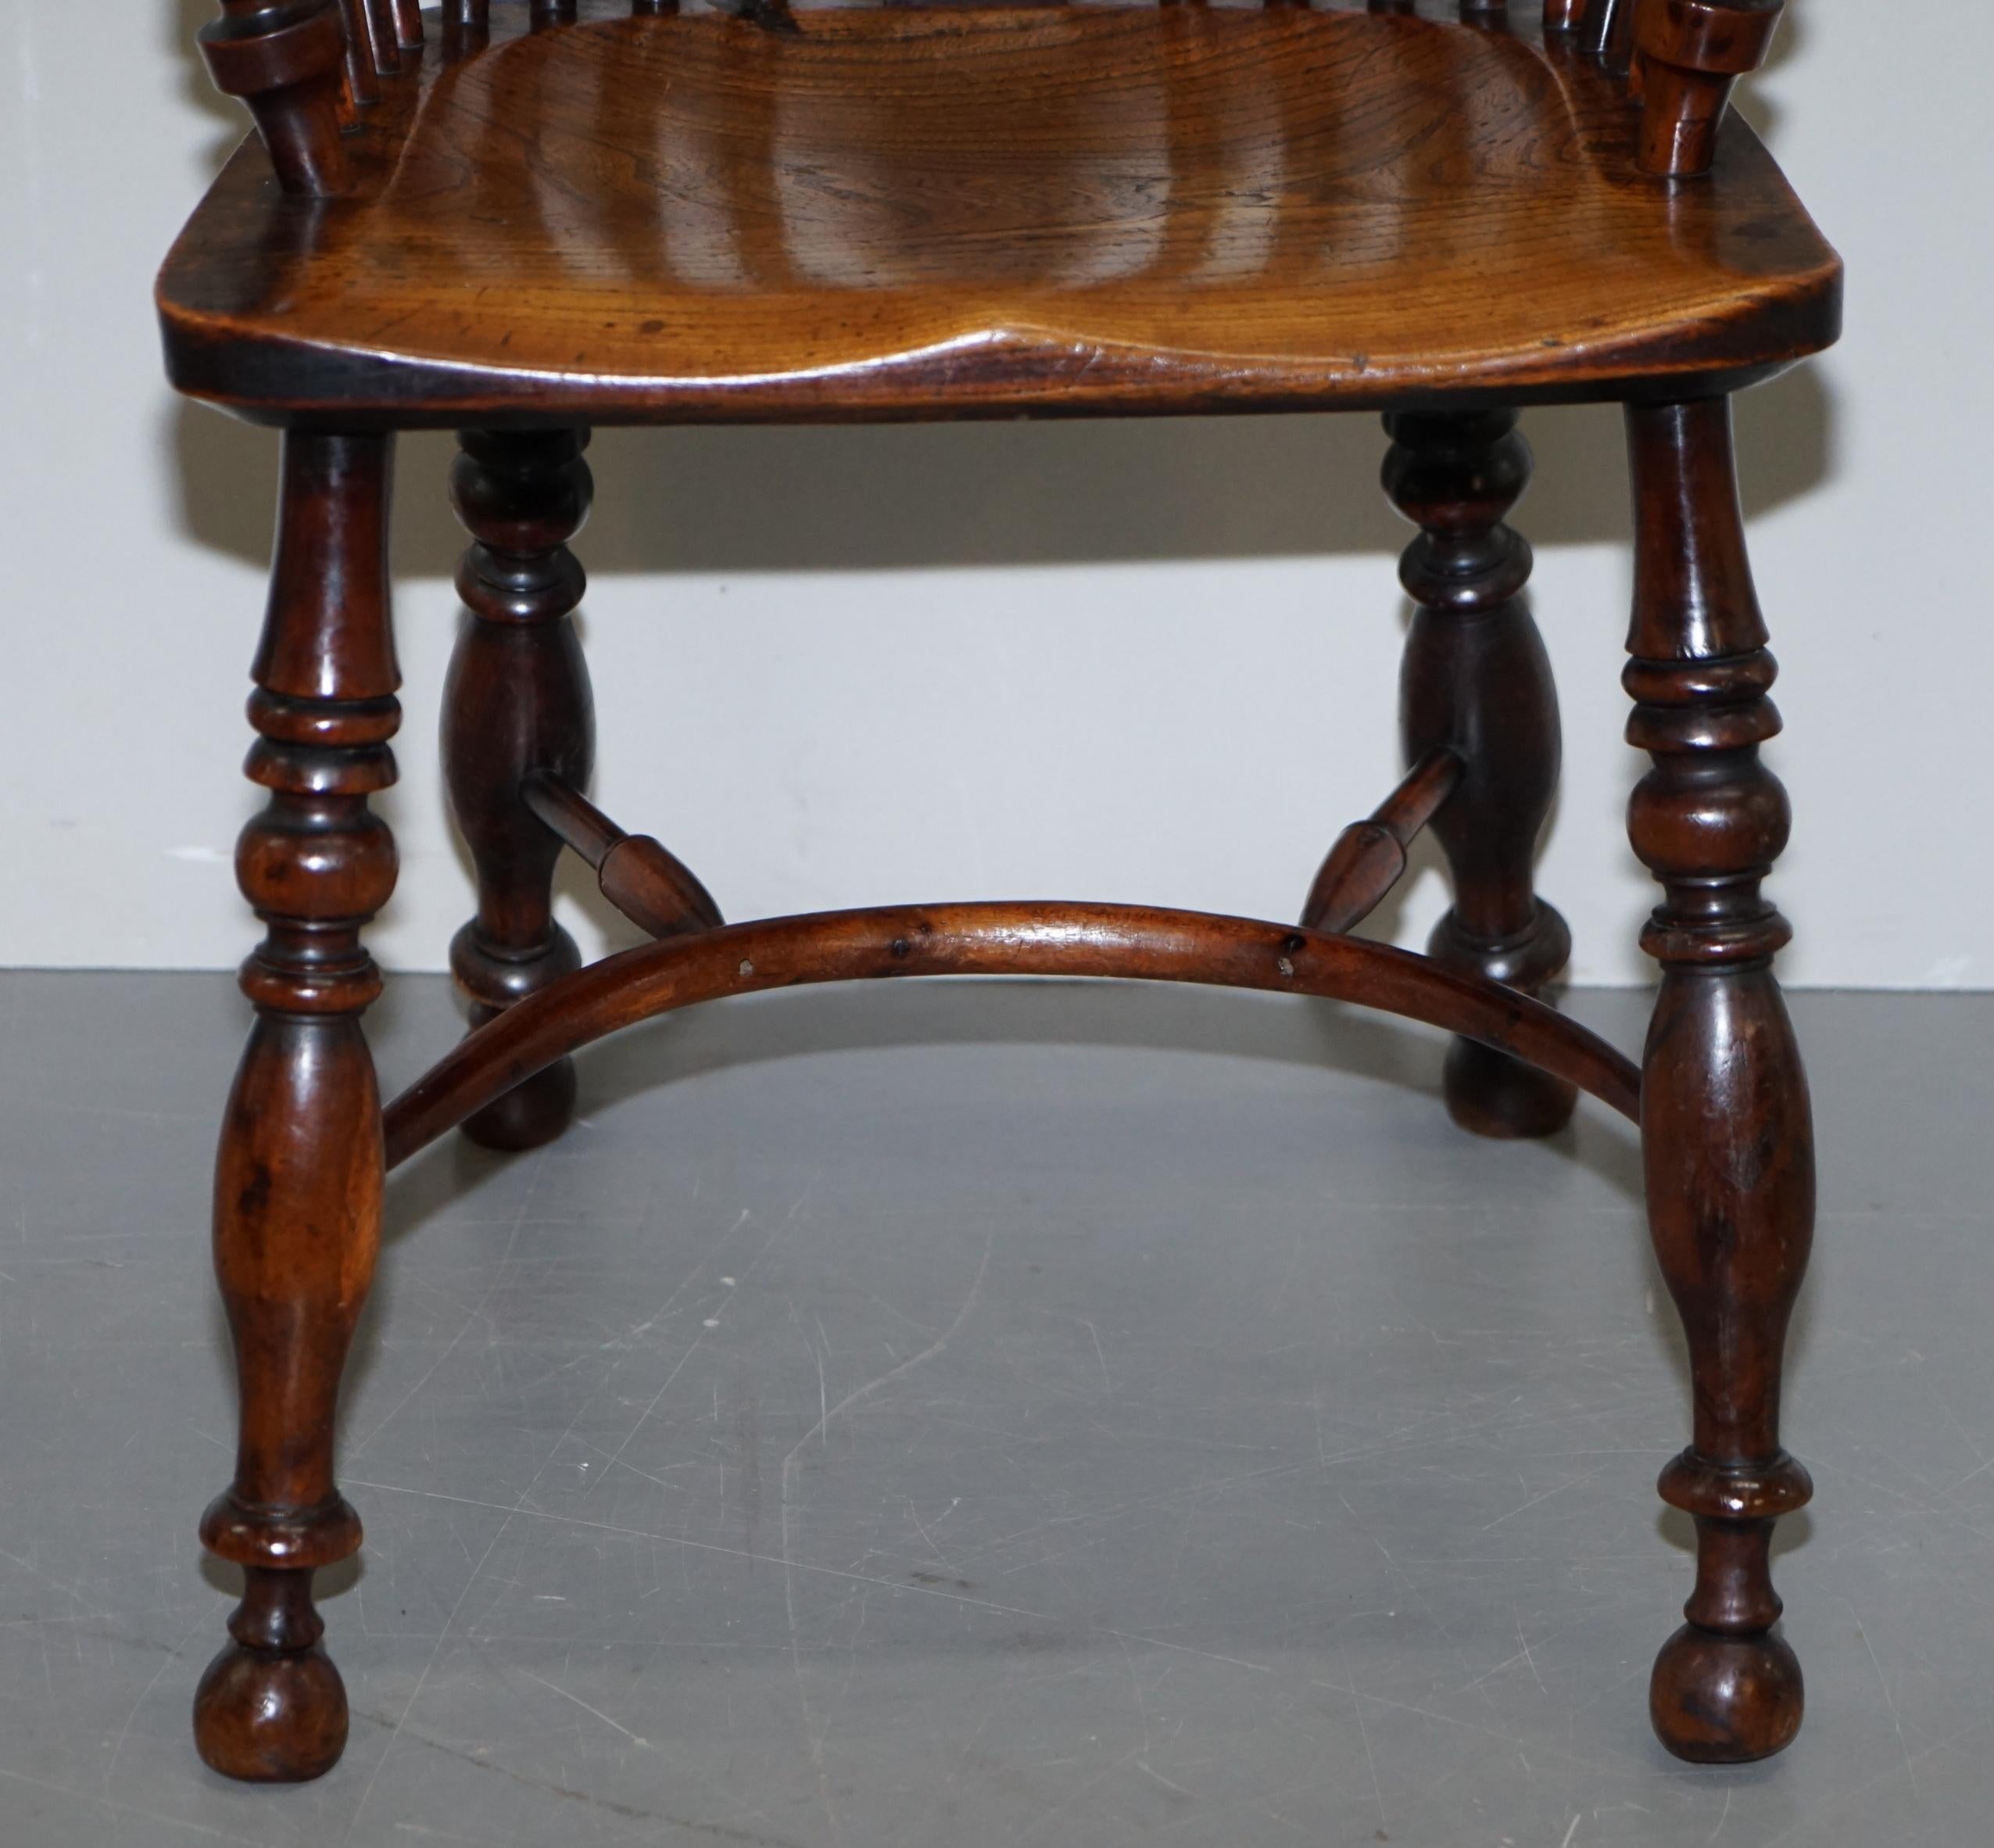 1 of 6 Burr Yew Wood & Elm Windsor Armchairs circa 1860 English Country House For Sale 6